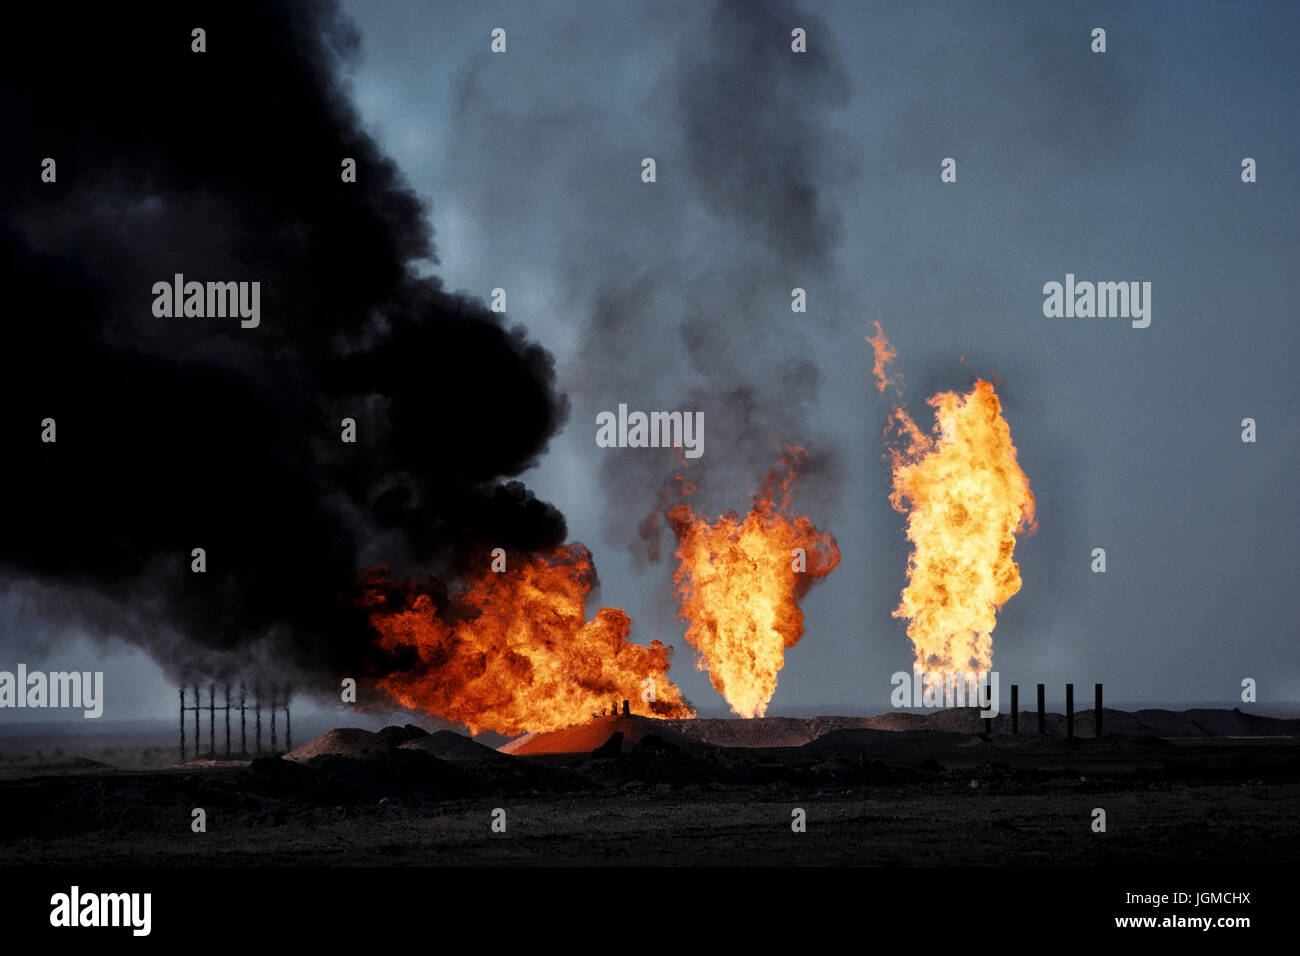 Burning natural gas in Iraq, refinery with Rumaila,, Brennendes Naturgas im Irak, Raffinerie bei Rumaila, Stock Photo